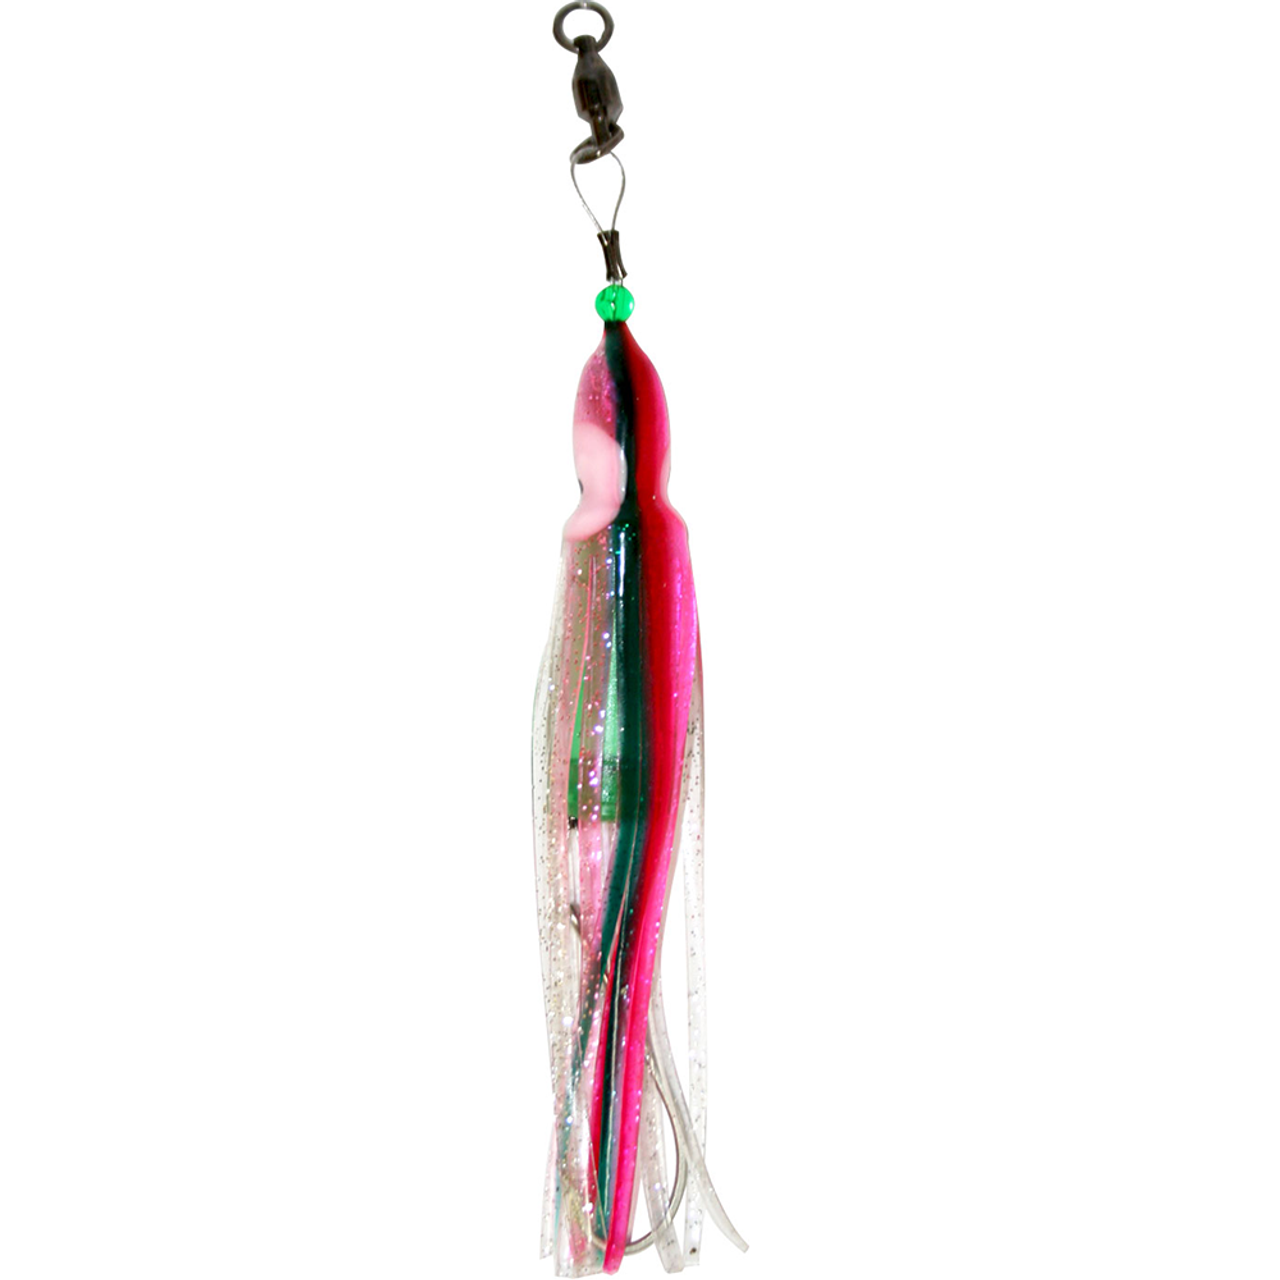 Squid Skirt Hoochie Lure - Two Toned Pink with Green Stripe